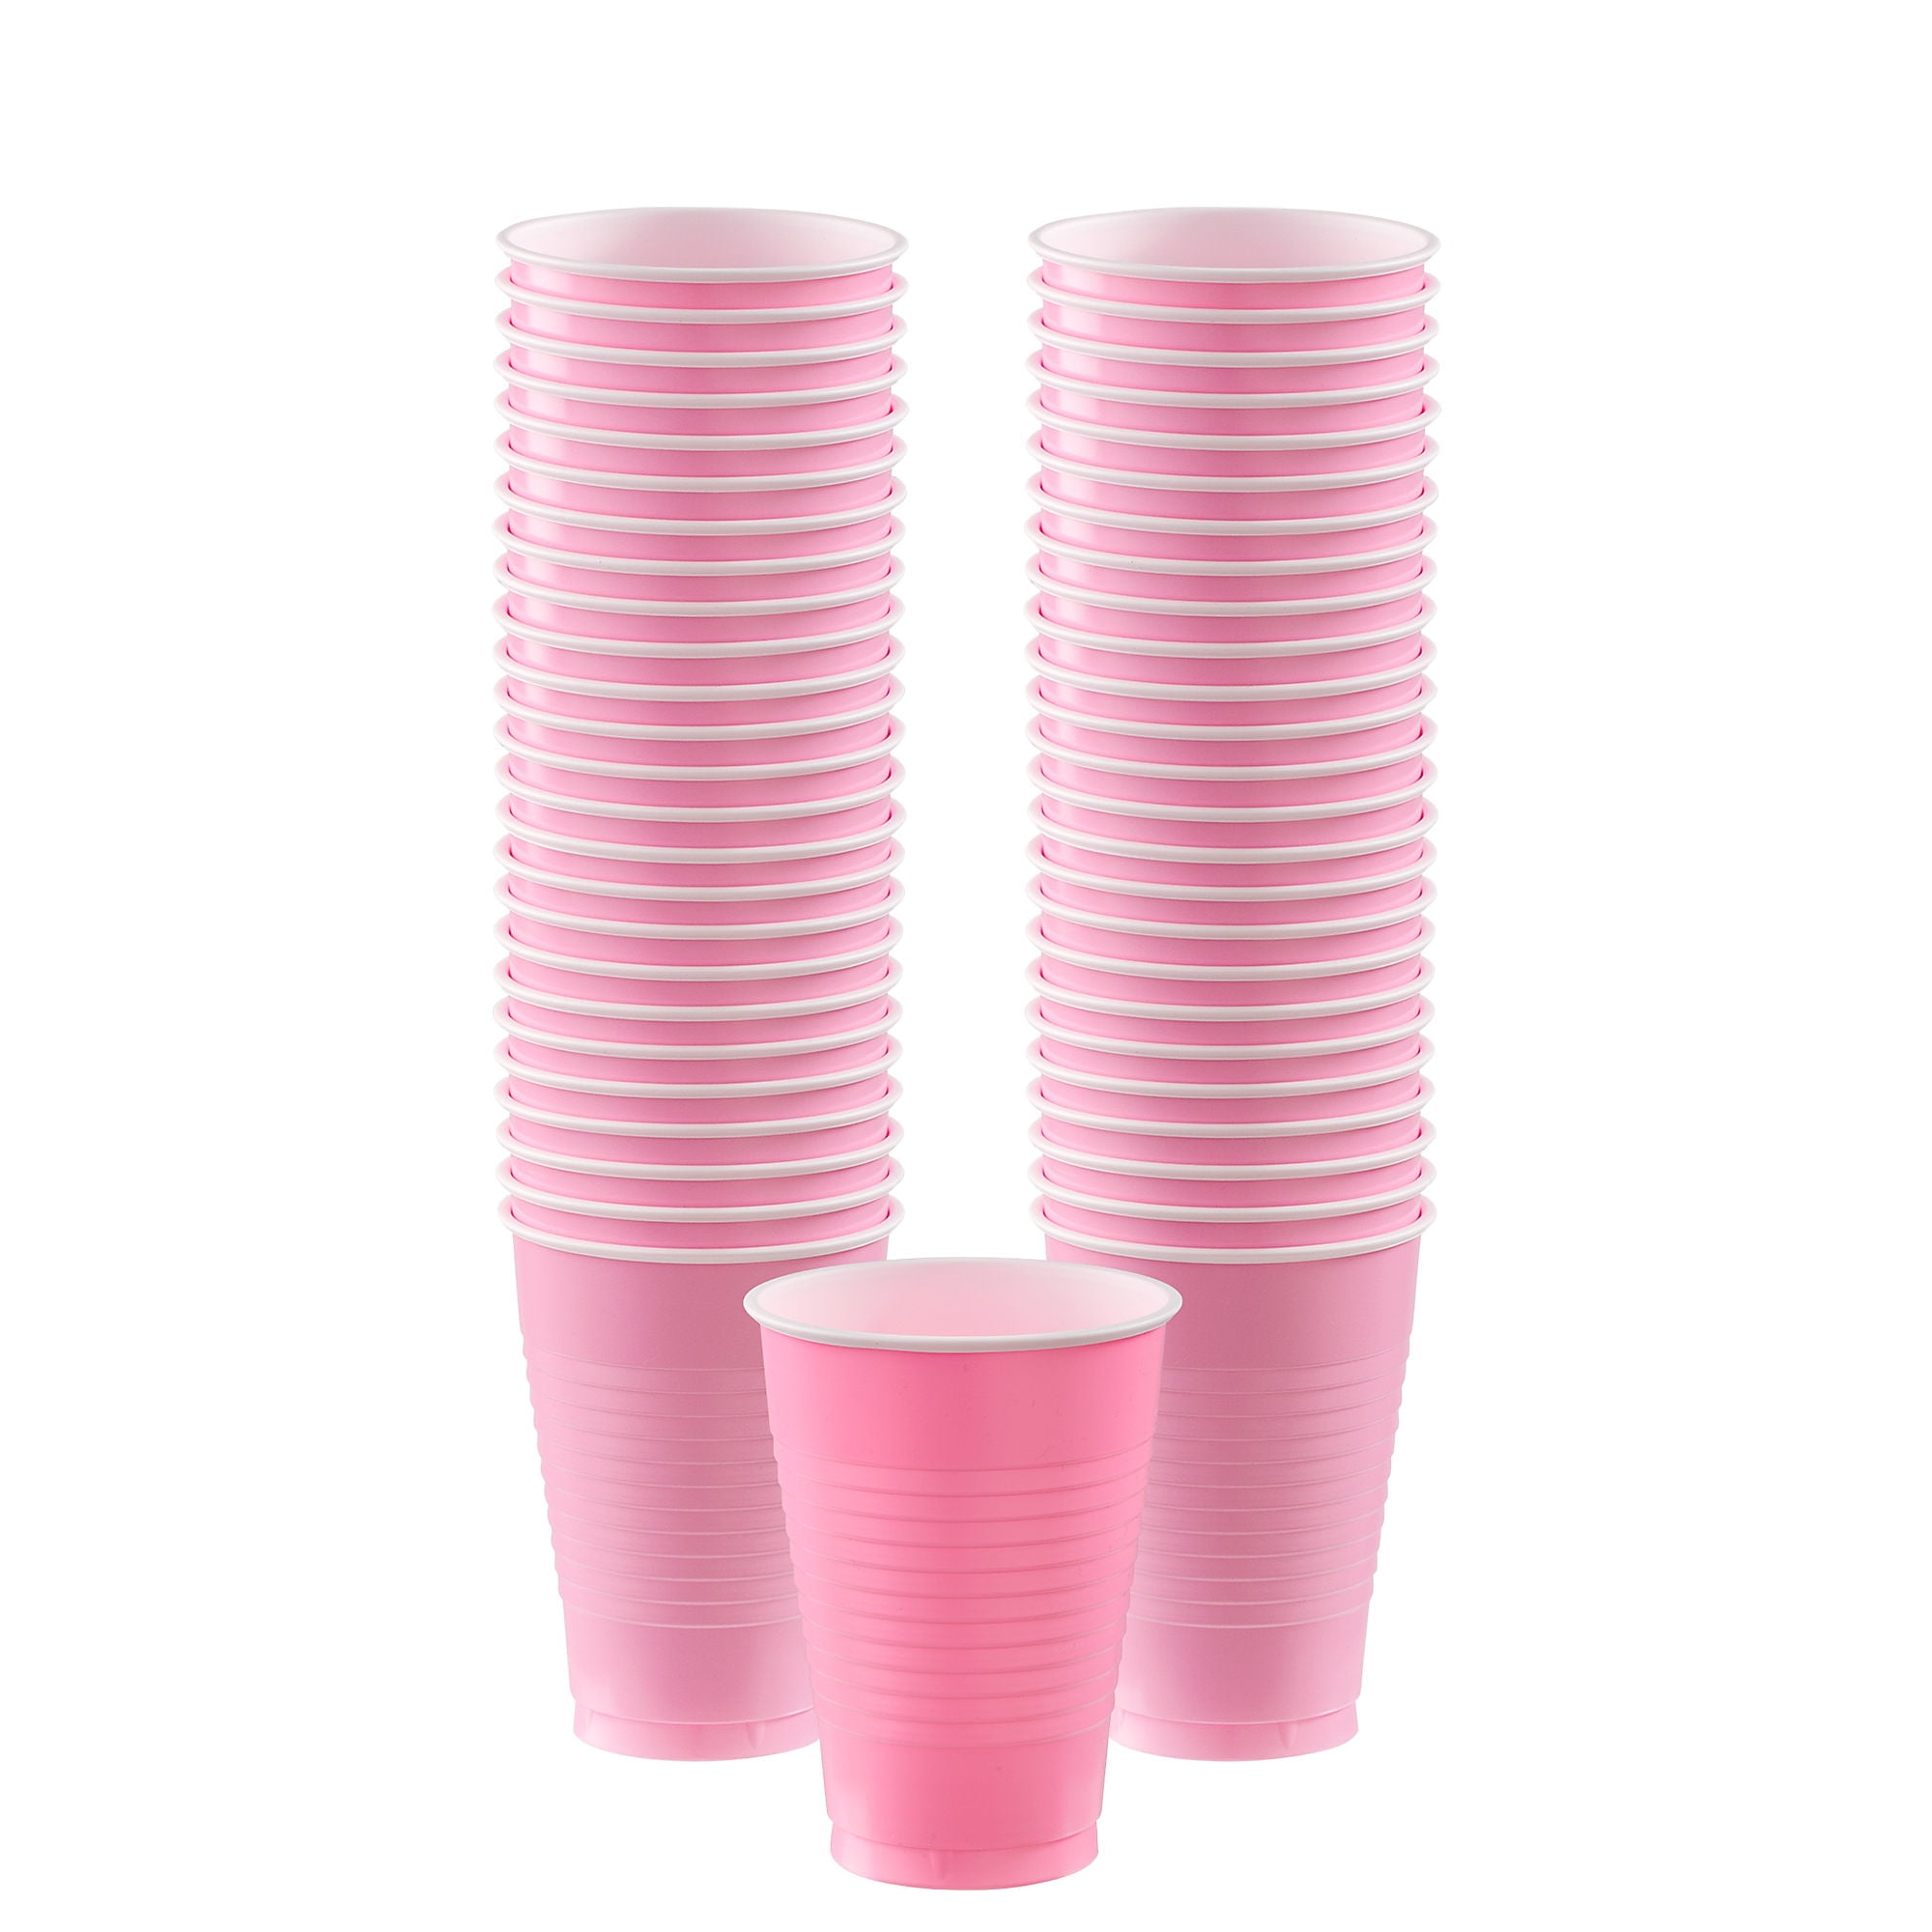 Amscan Big Party Pack 50 Count Plastic Cups New Pink 12-Ounce